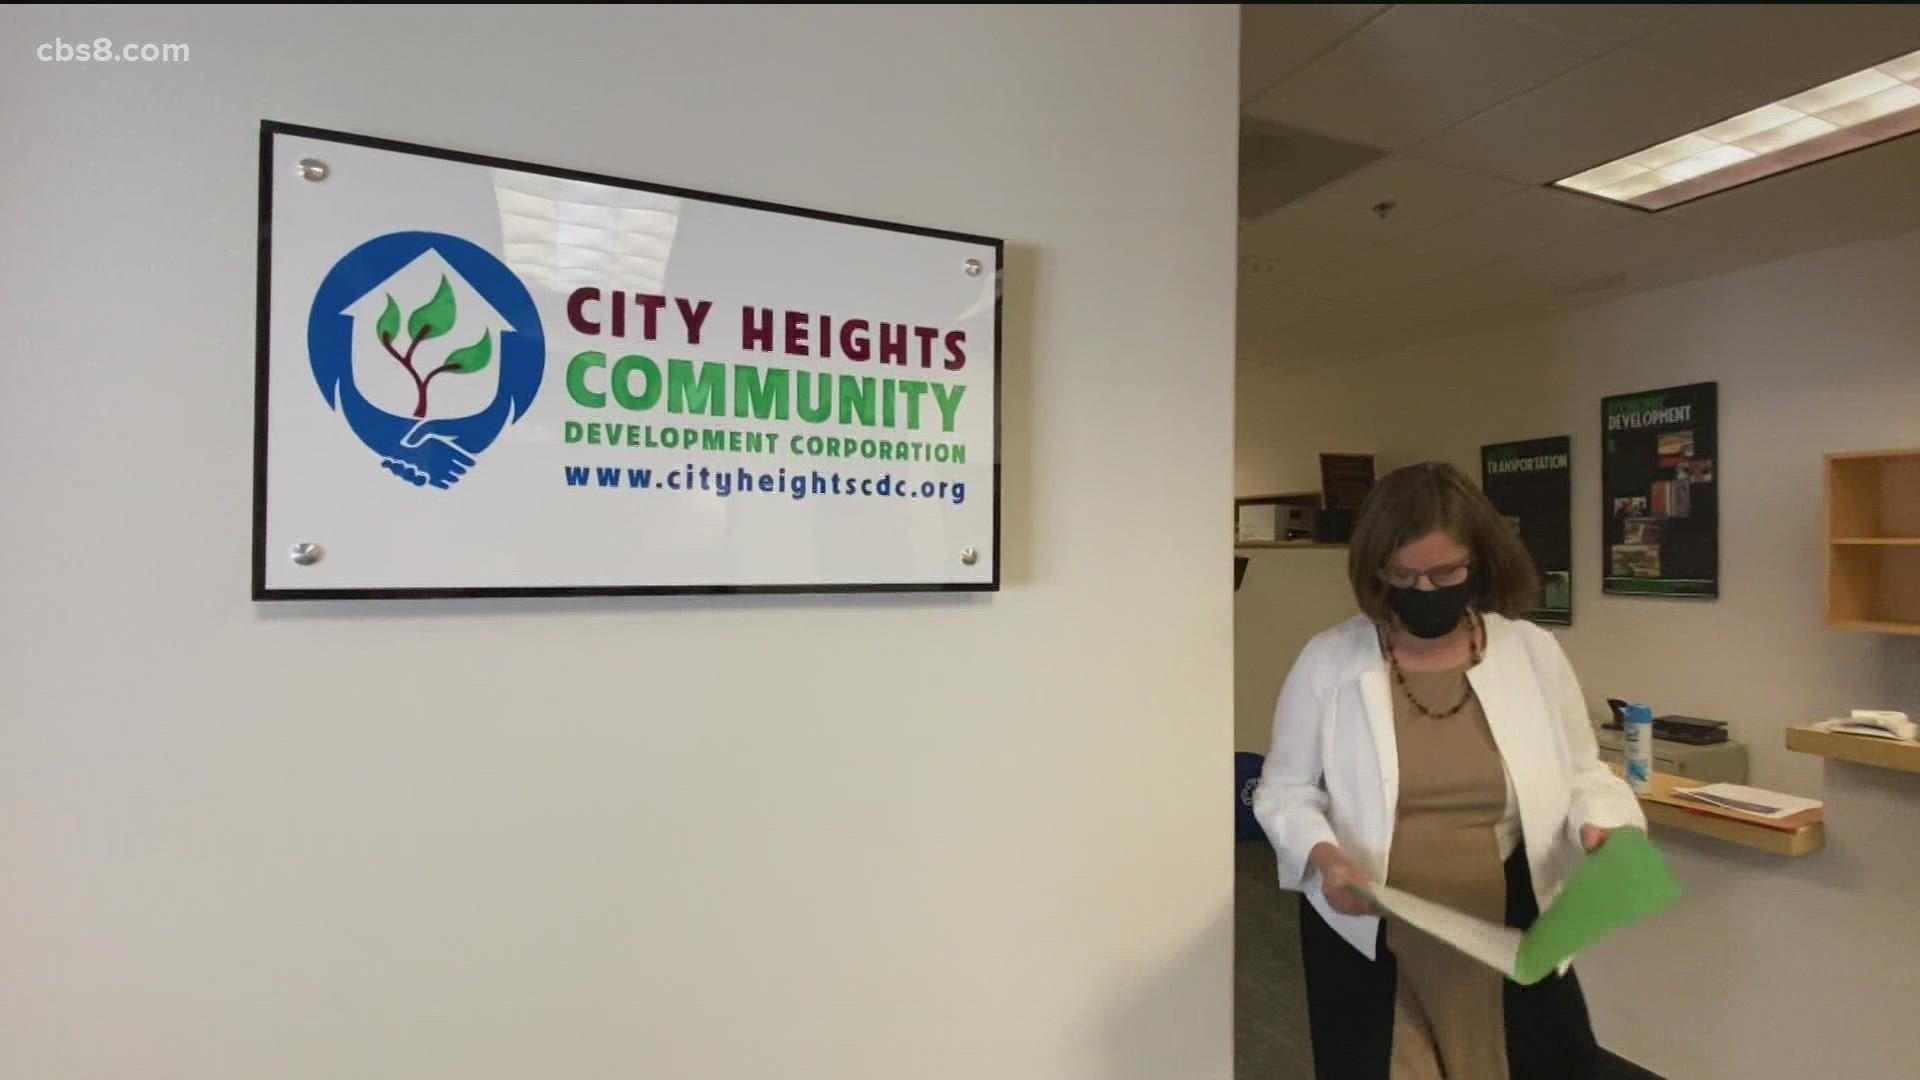 The City Heights Community Development Corporation started as a grassroots campaign during I-15's construction. It now helps businesses and residents succeed.